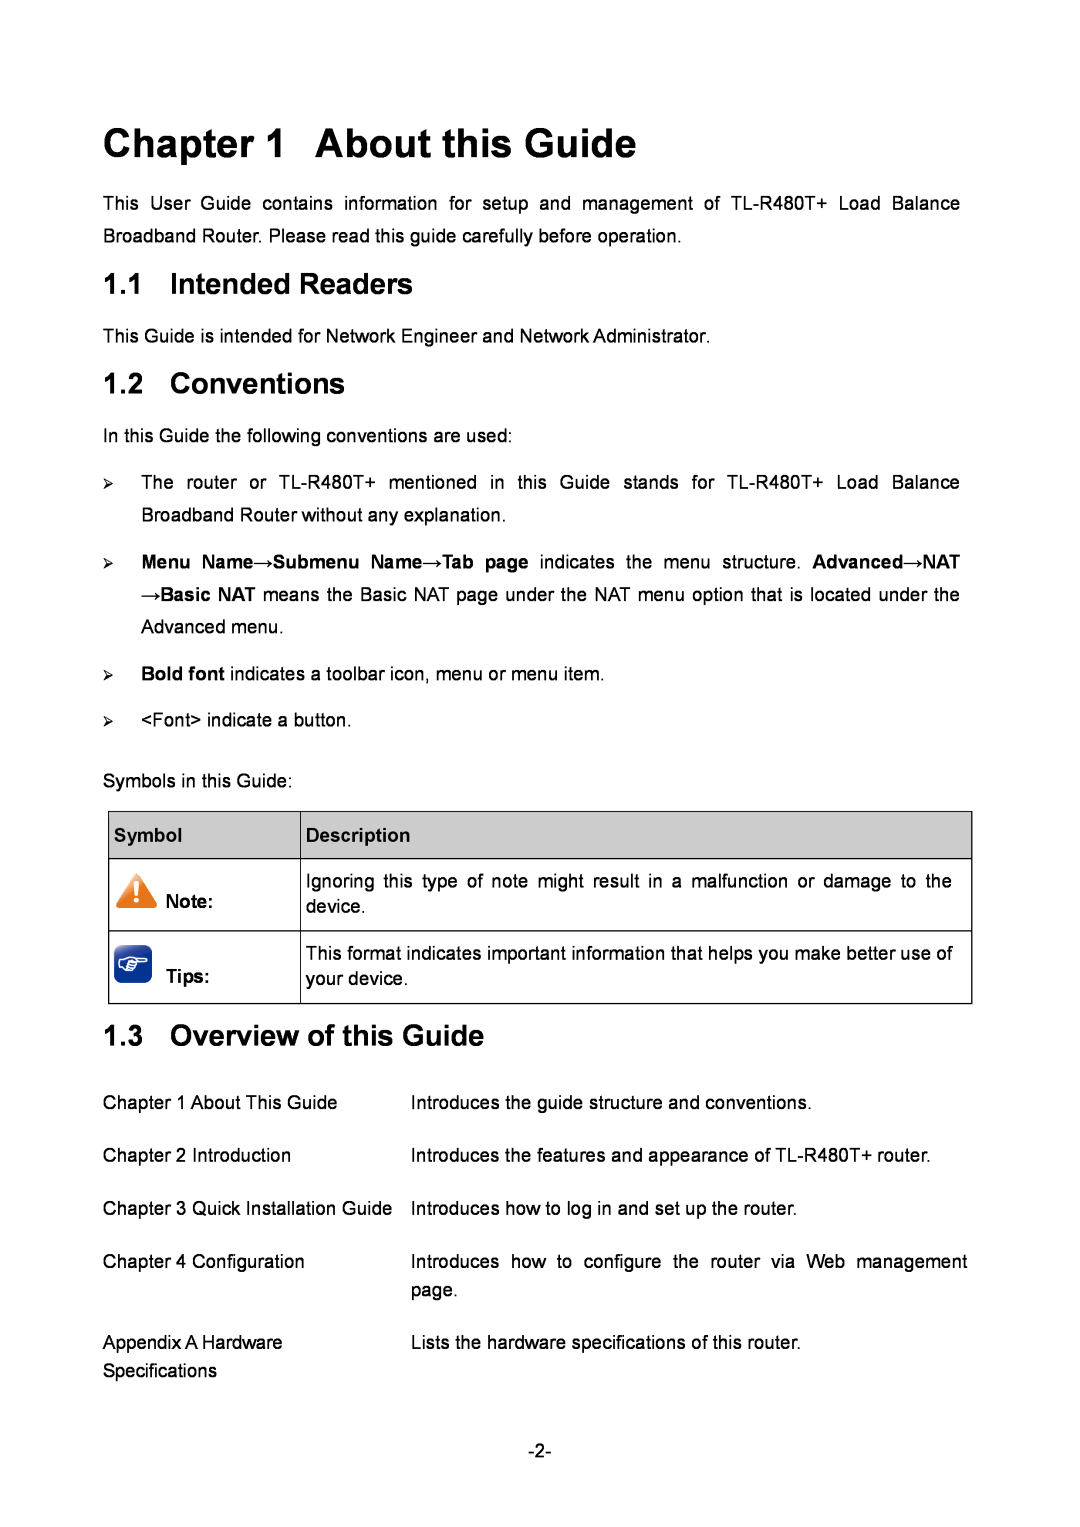 TP-Link TL-R480T+ About this Guide, Intended Readers, Conventions, Overview of this Guide, Symbol, Description, device 